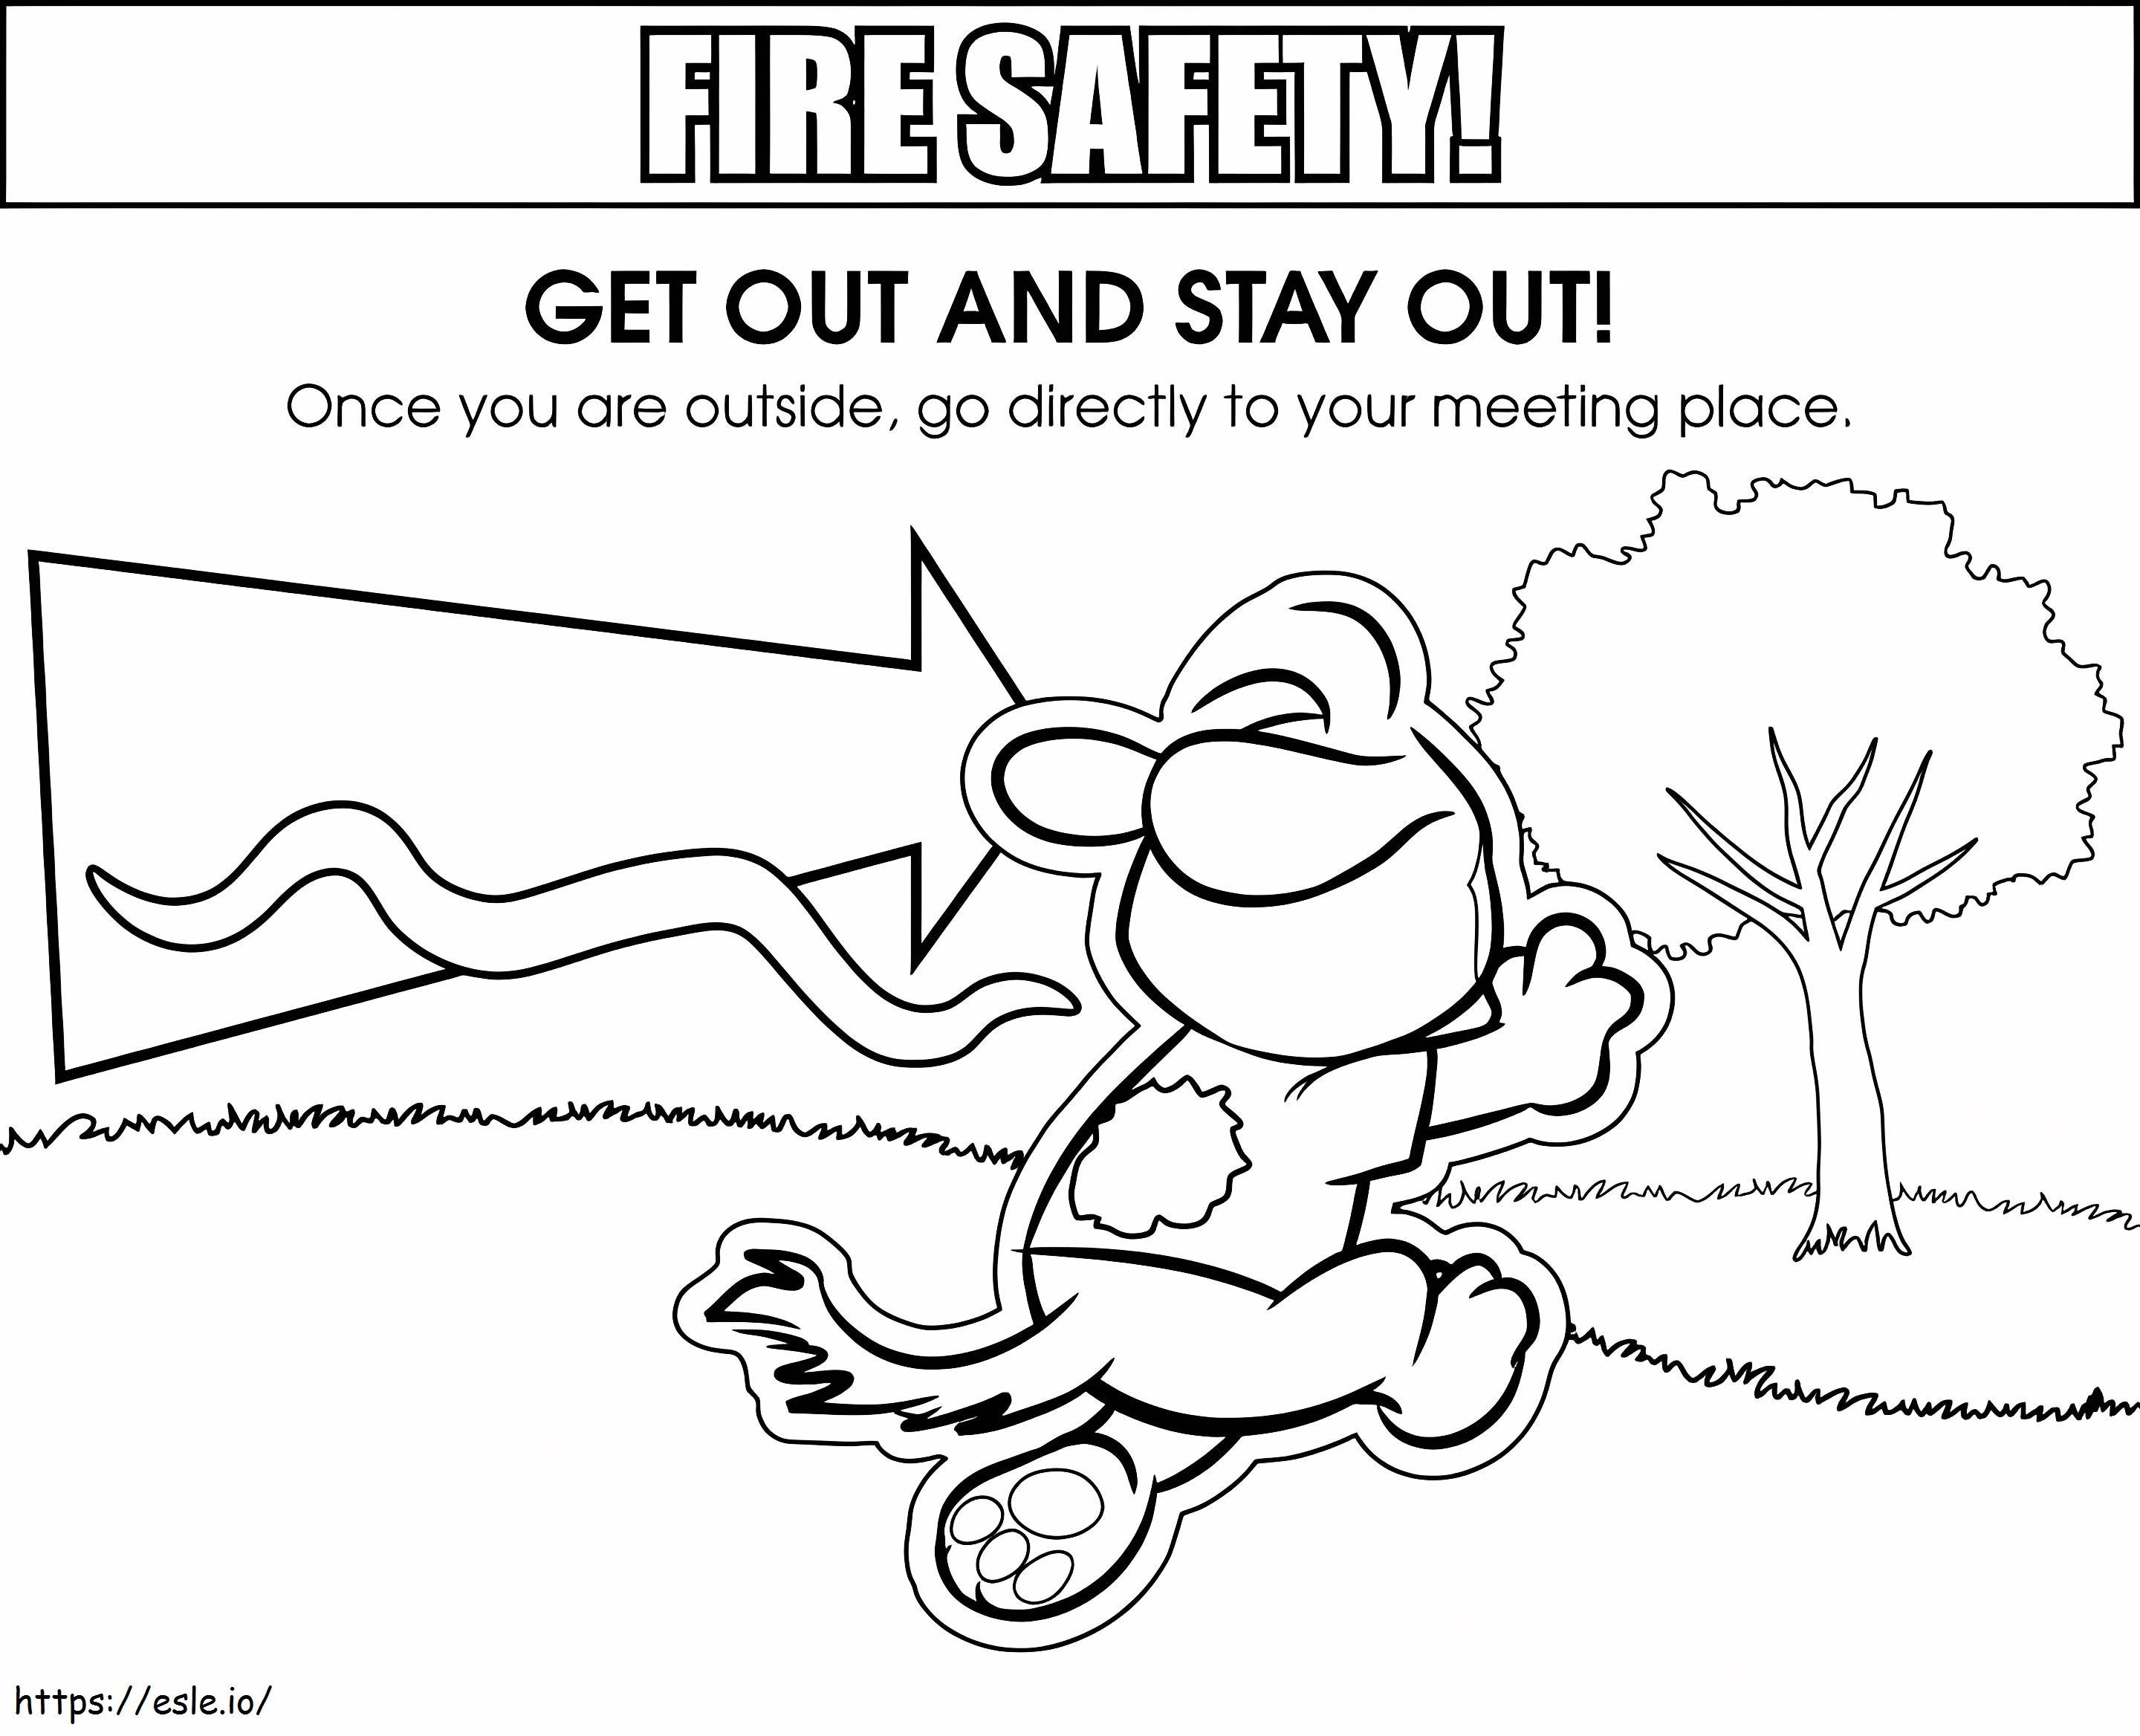 Get Out And Stay Out Fire Safety coloring page